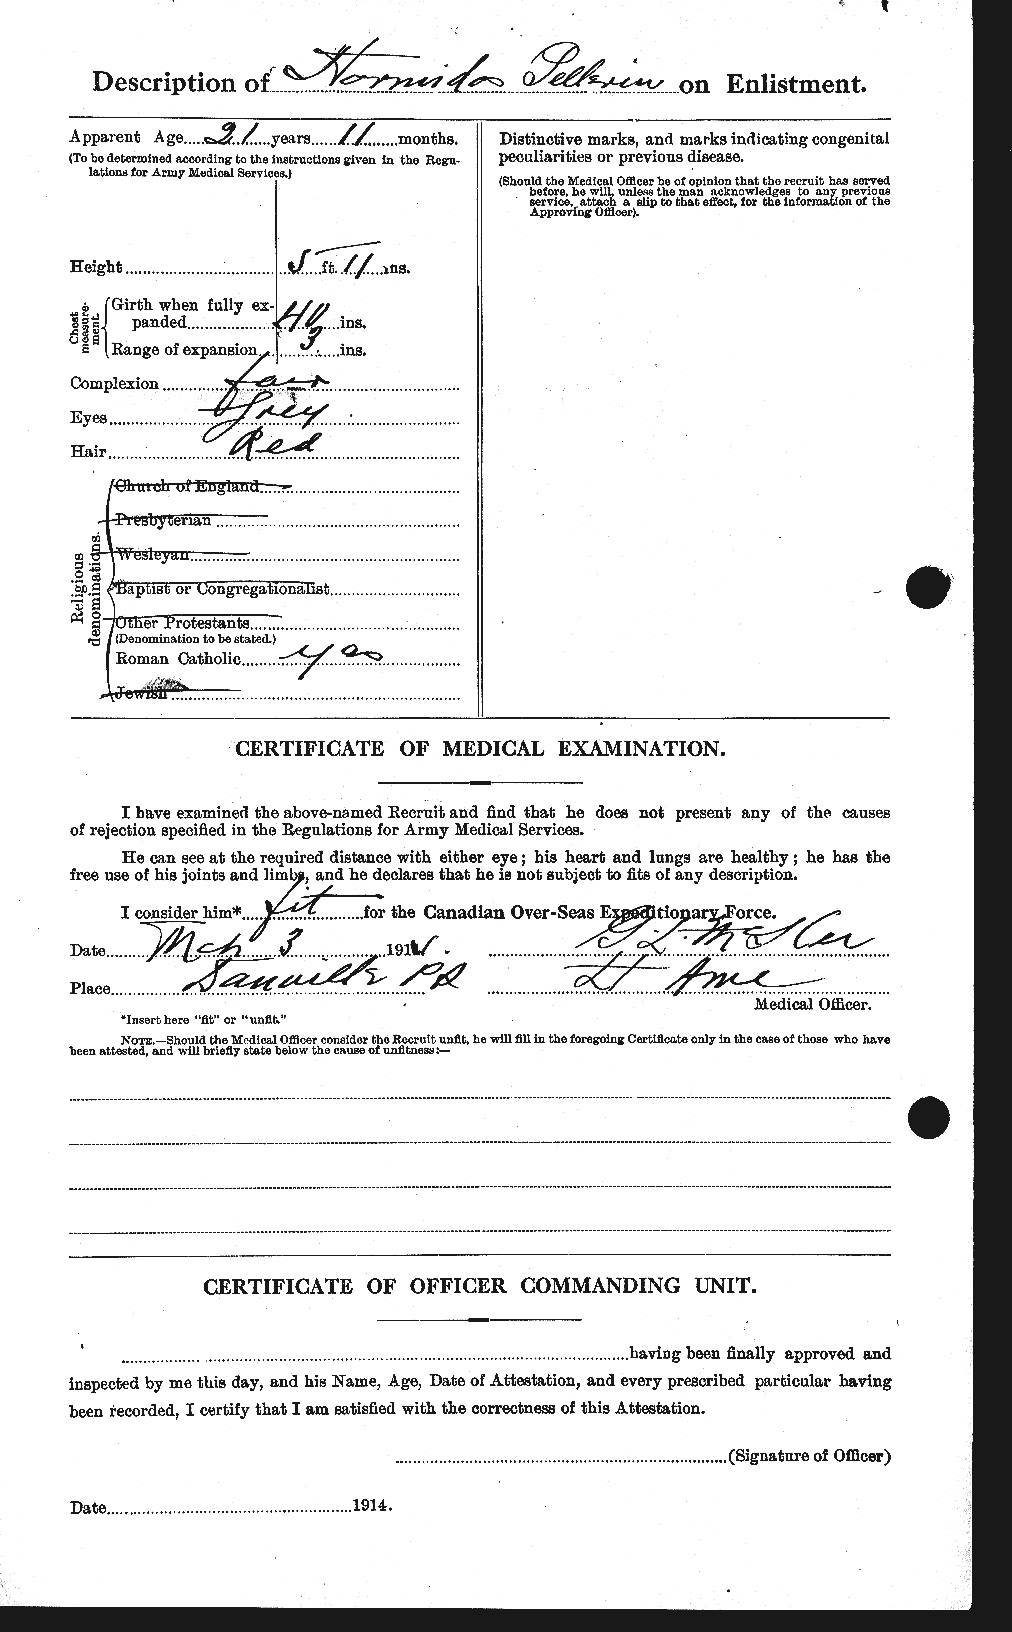 Personnel Records of the First World War - CEF 572252b